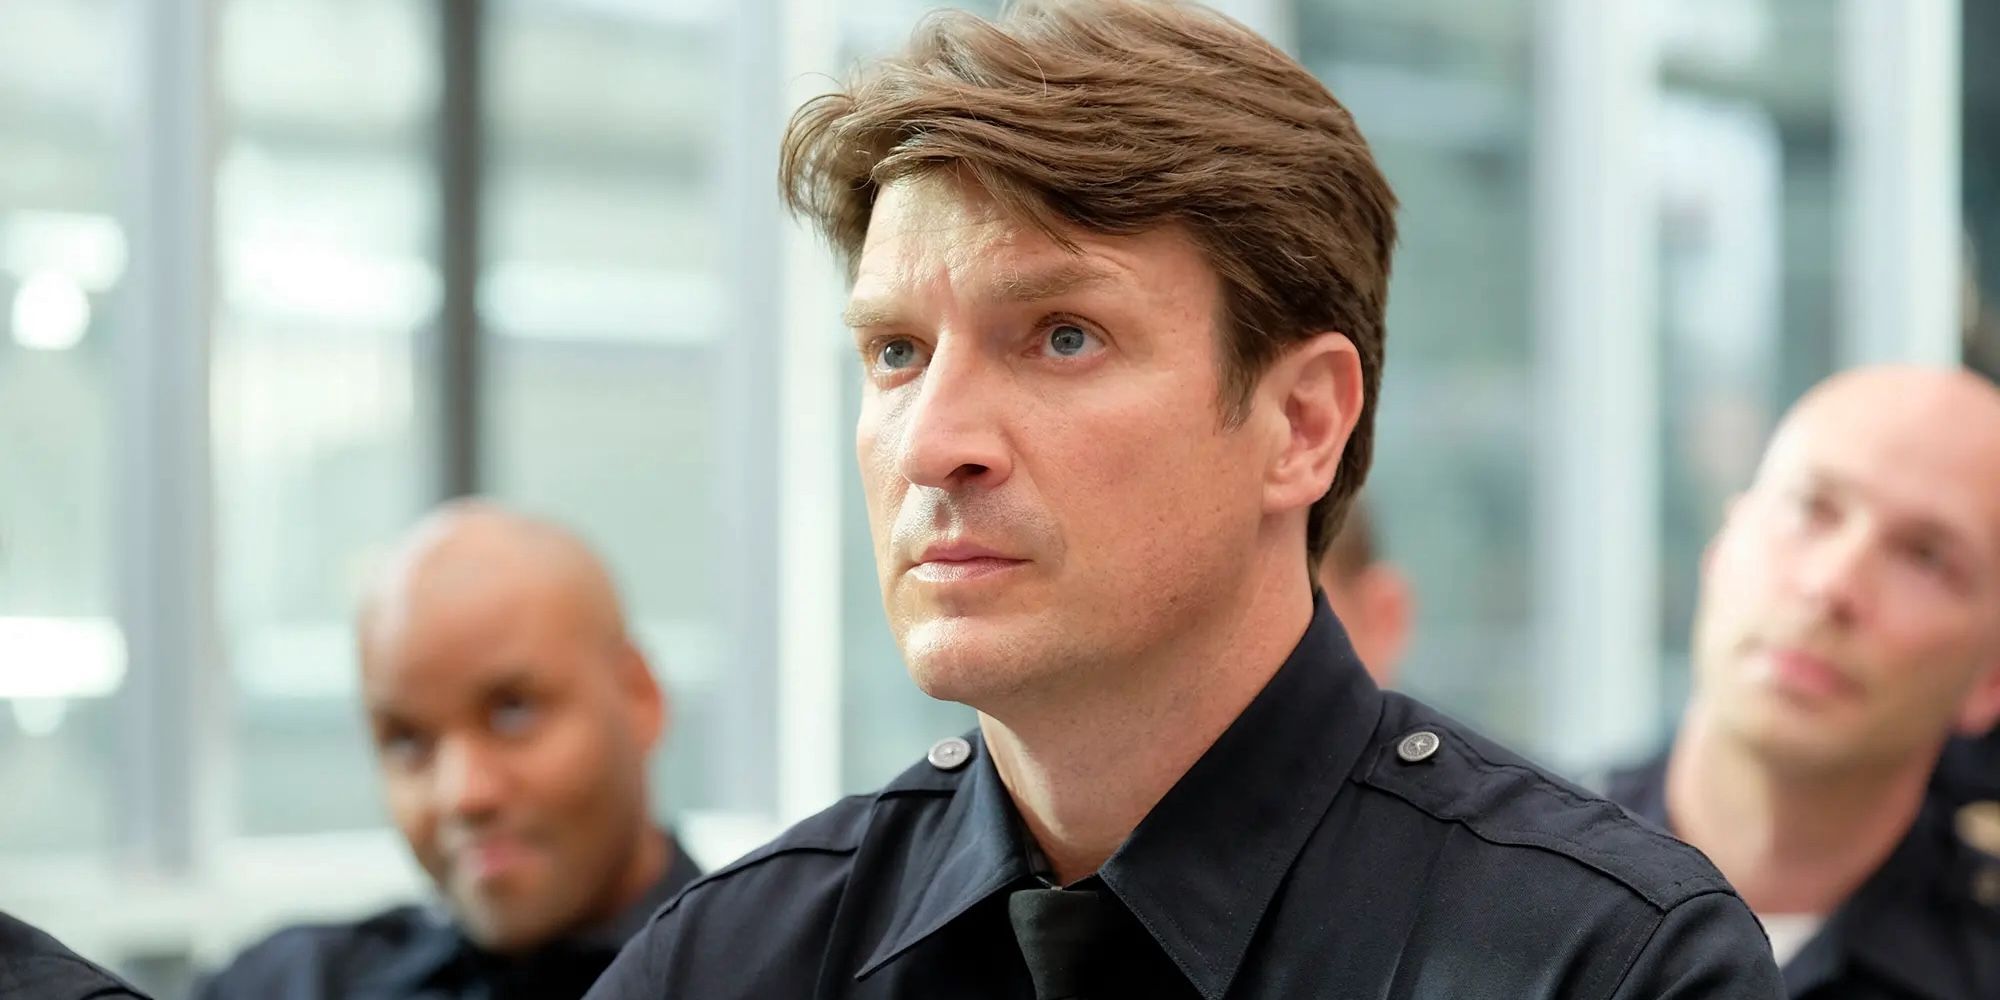 Nathan Fillion raising his eyebrow suspiciously in 'The Rookie' on ABC